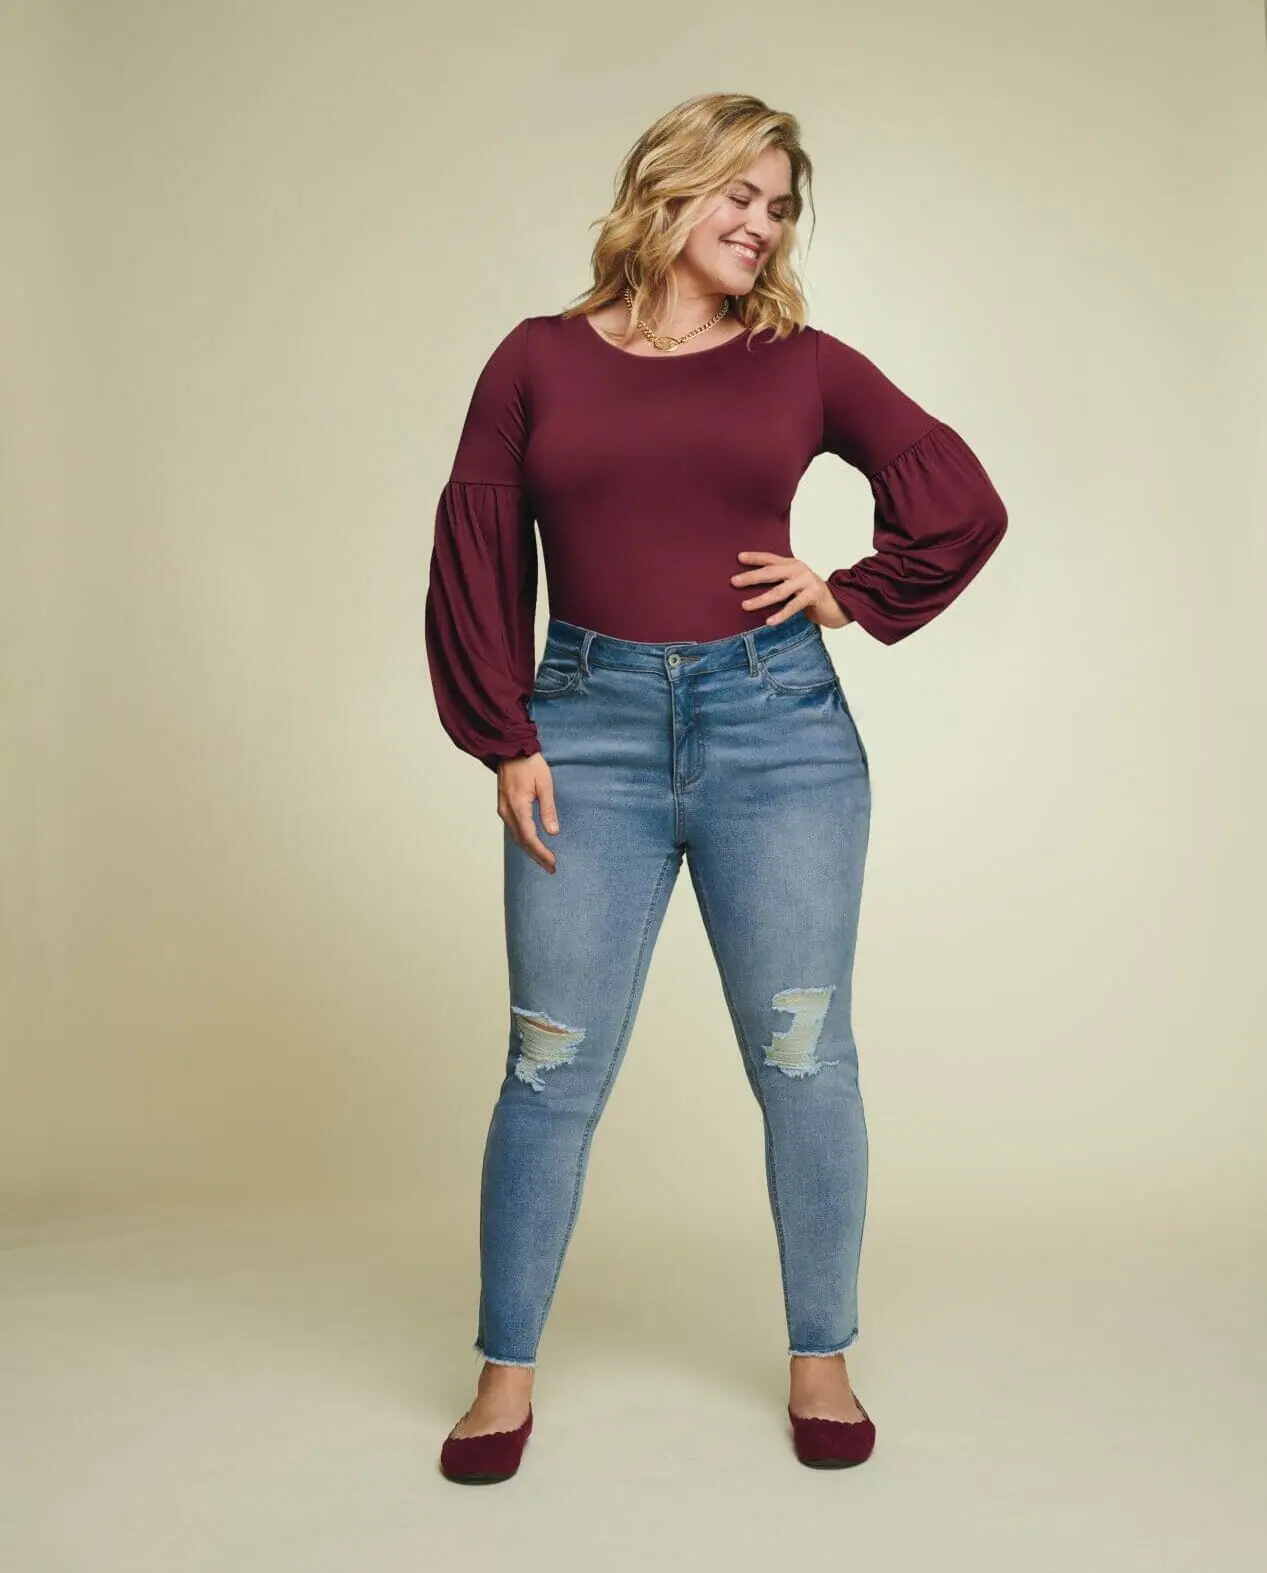 Nice Plus Size Party Outfits for a Tall Lady : Plus Size Fashion Tips 